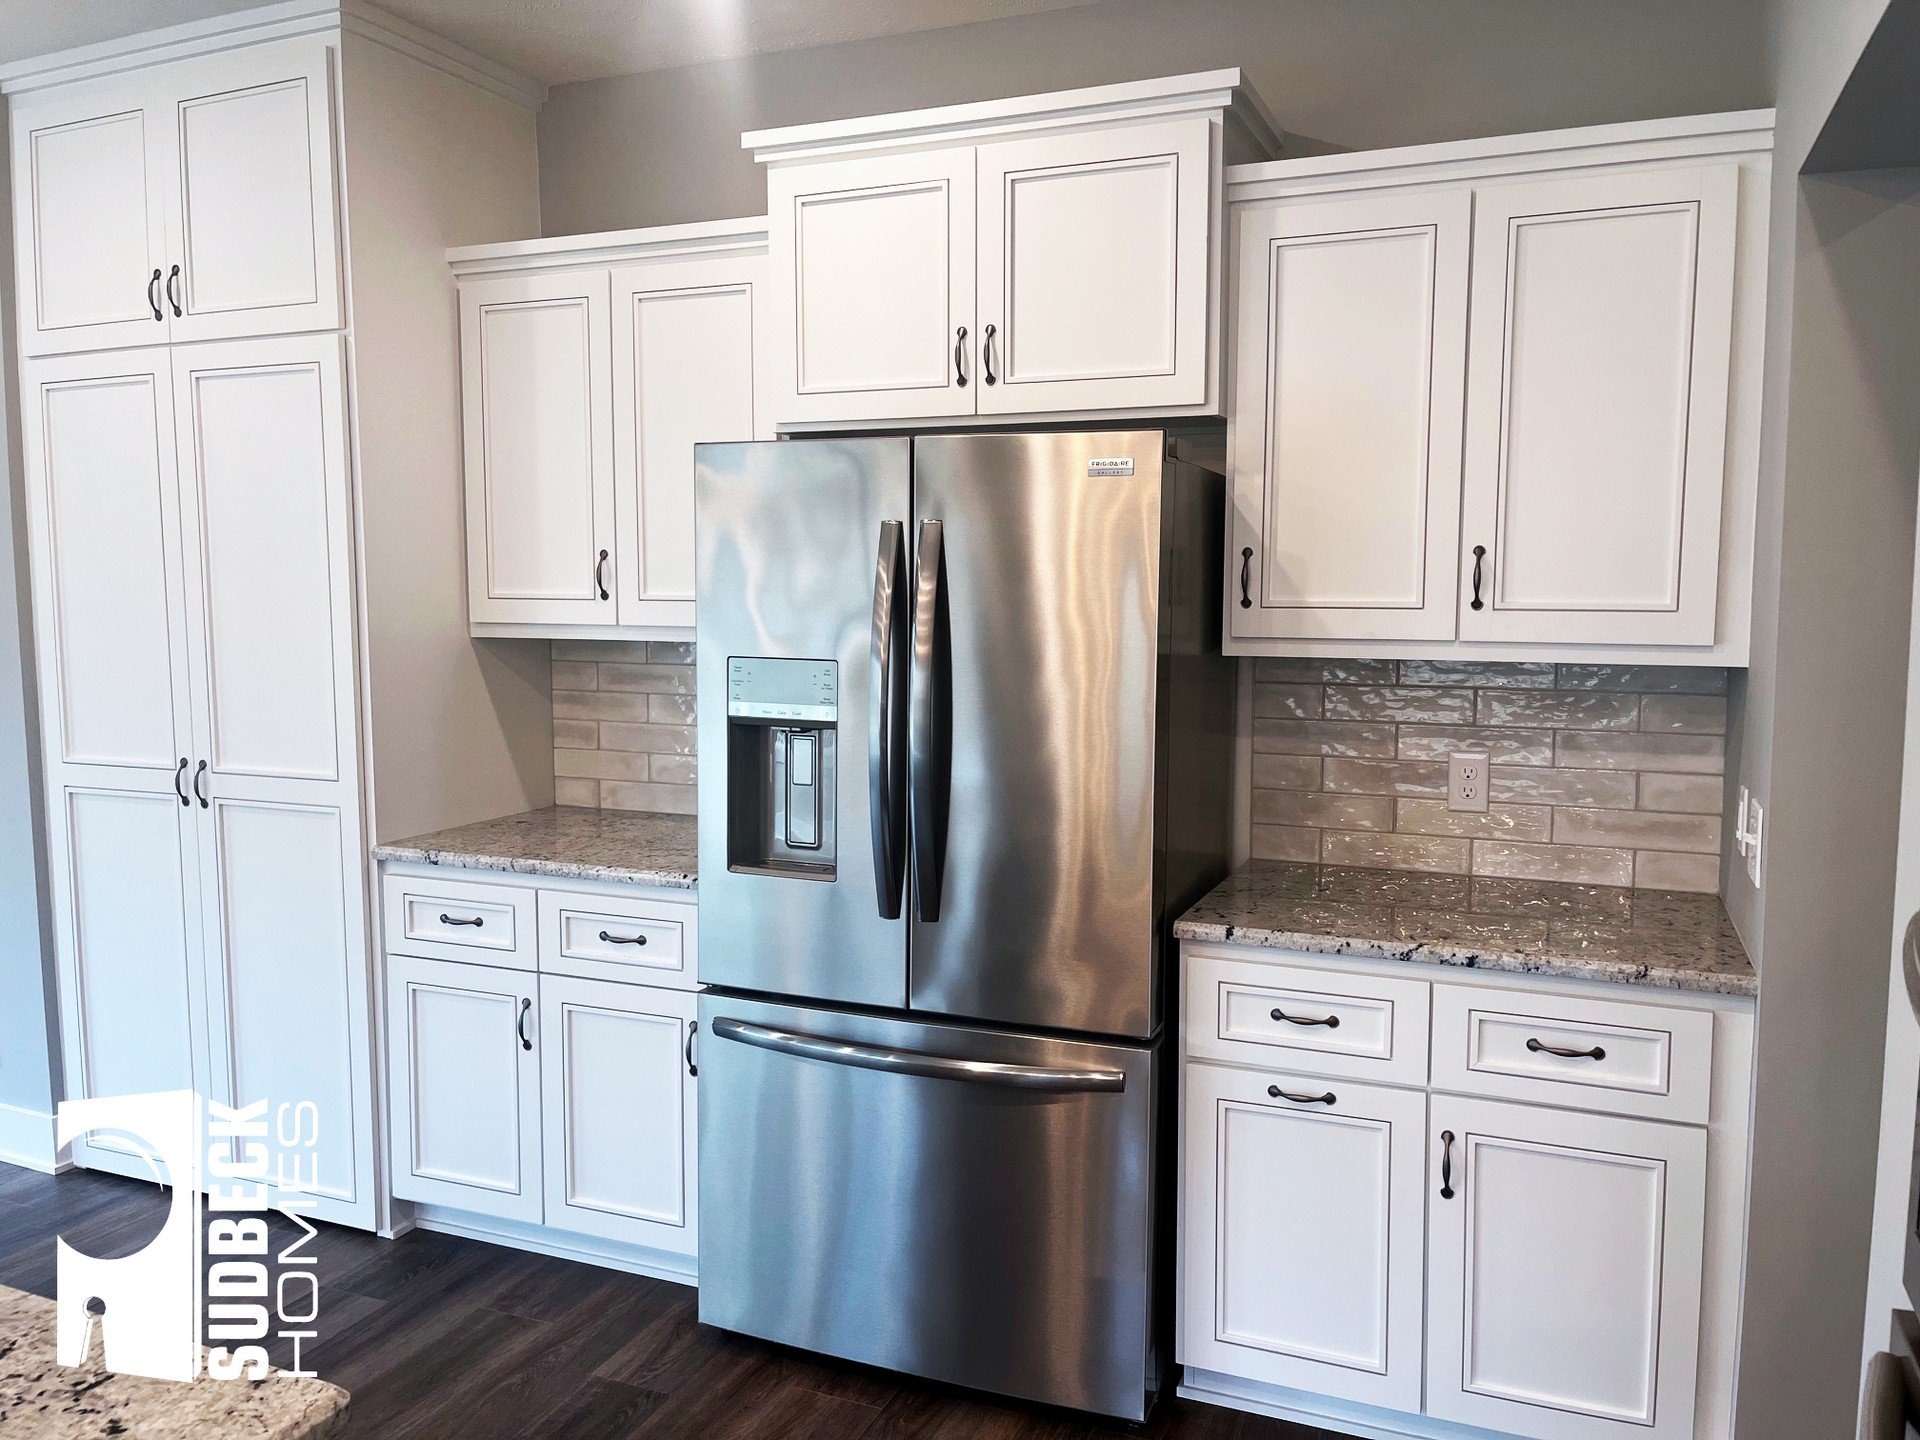 New project means new looks! Custom kitchens allow YOU, the buyer, to express yourself through the design YOU want! We'll work side by side in an effort to create your dream kitchen!

Contact us through our website! Link in our bio!

#SudbeckHomes #n